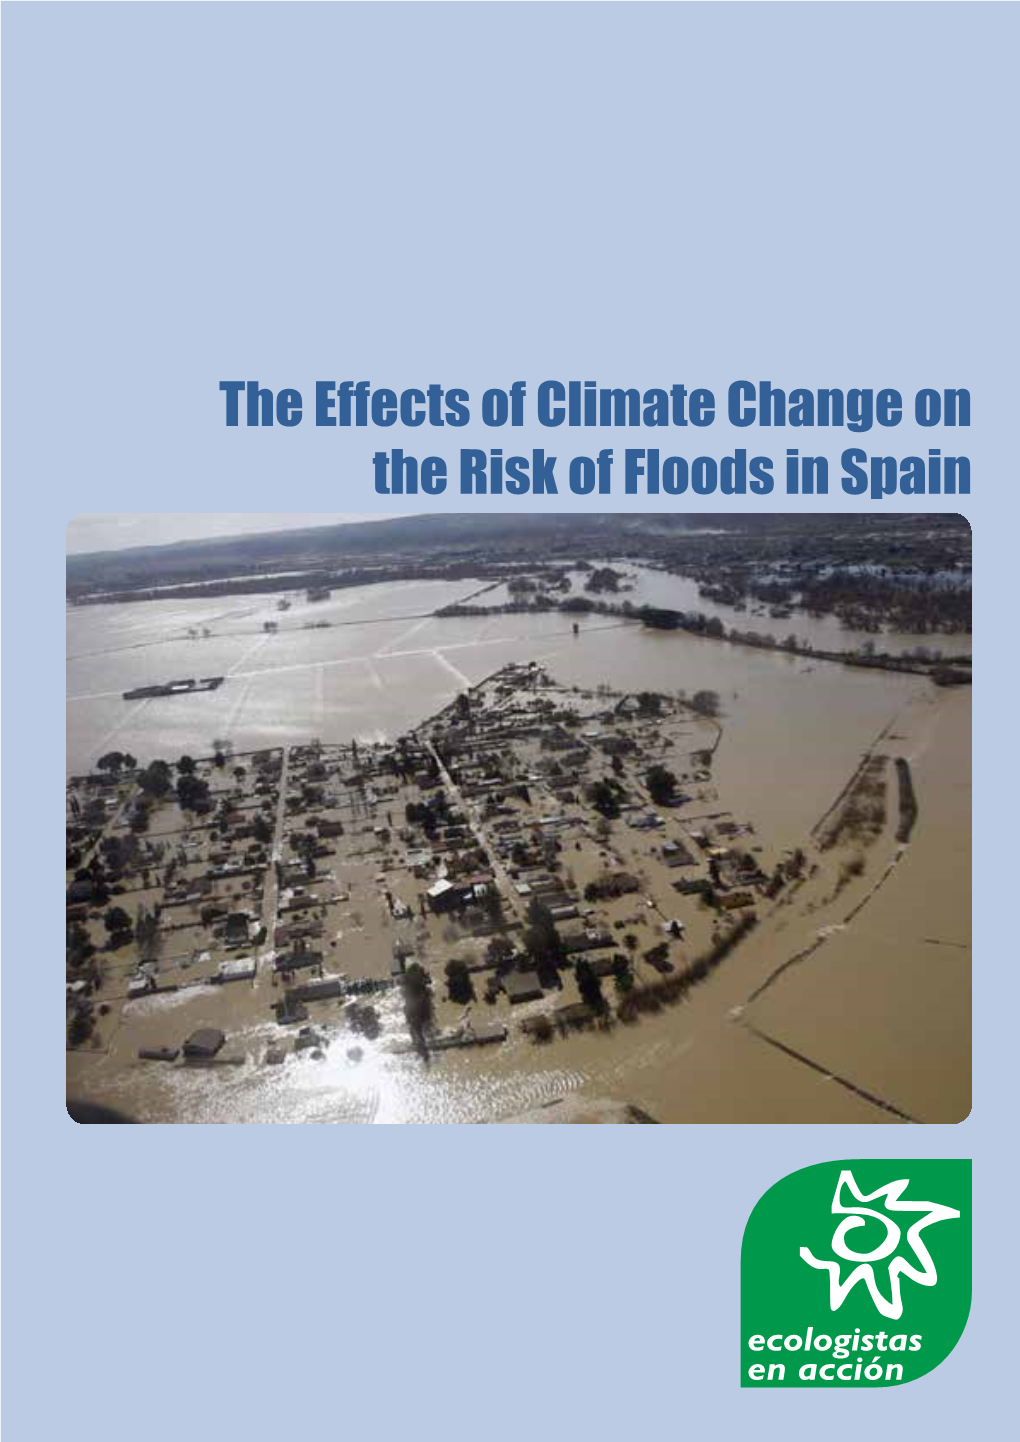 The Effects of Climate Change on the Risk of Floods in Spain